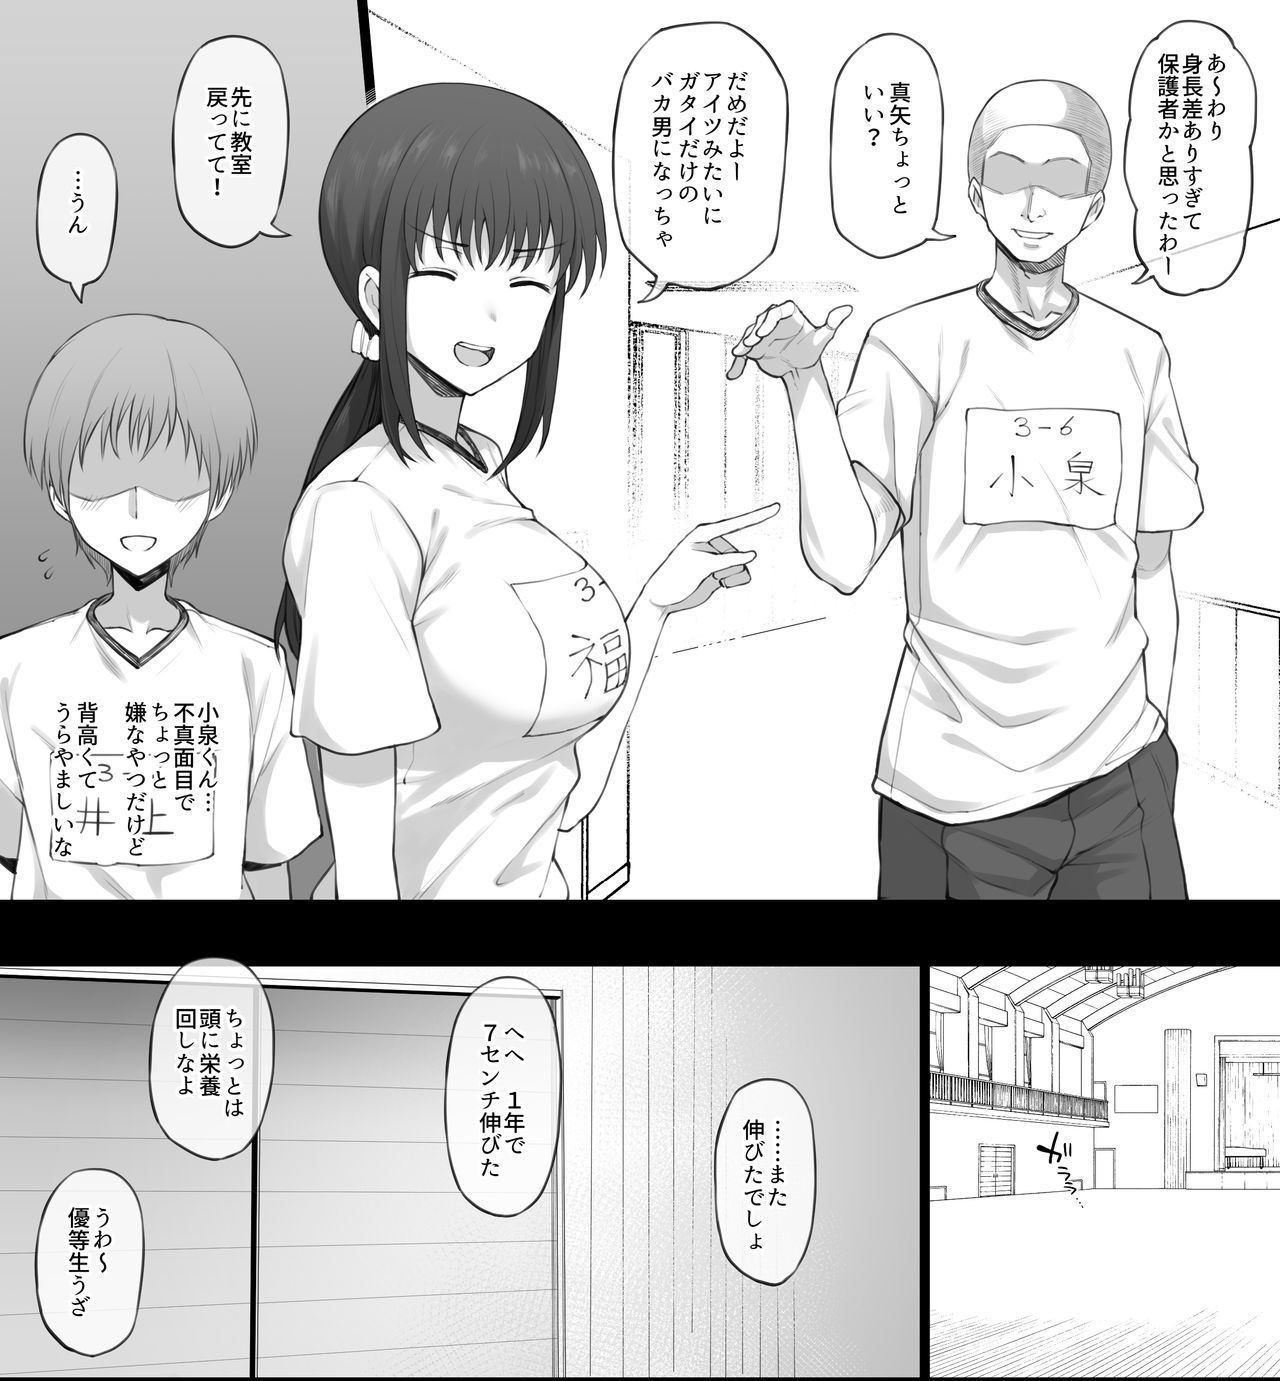 【Image】The most erotic club activity is the women's volleyball club wwwwww 10